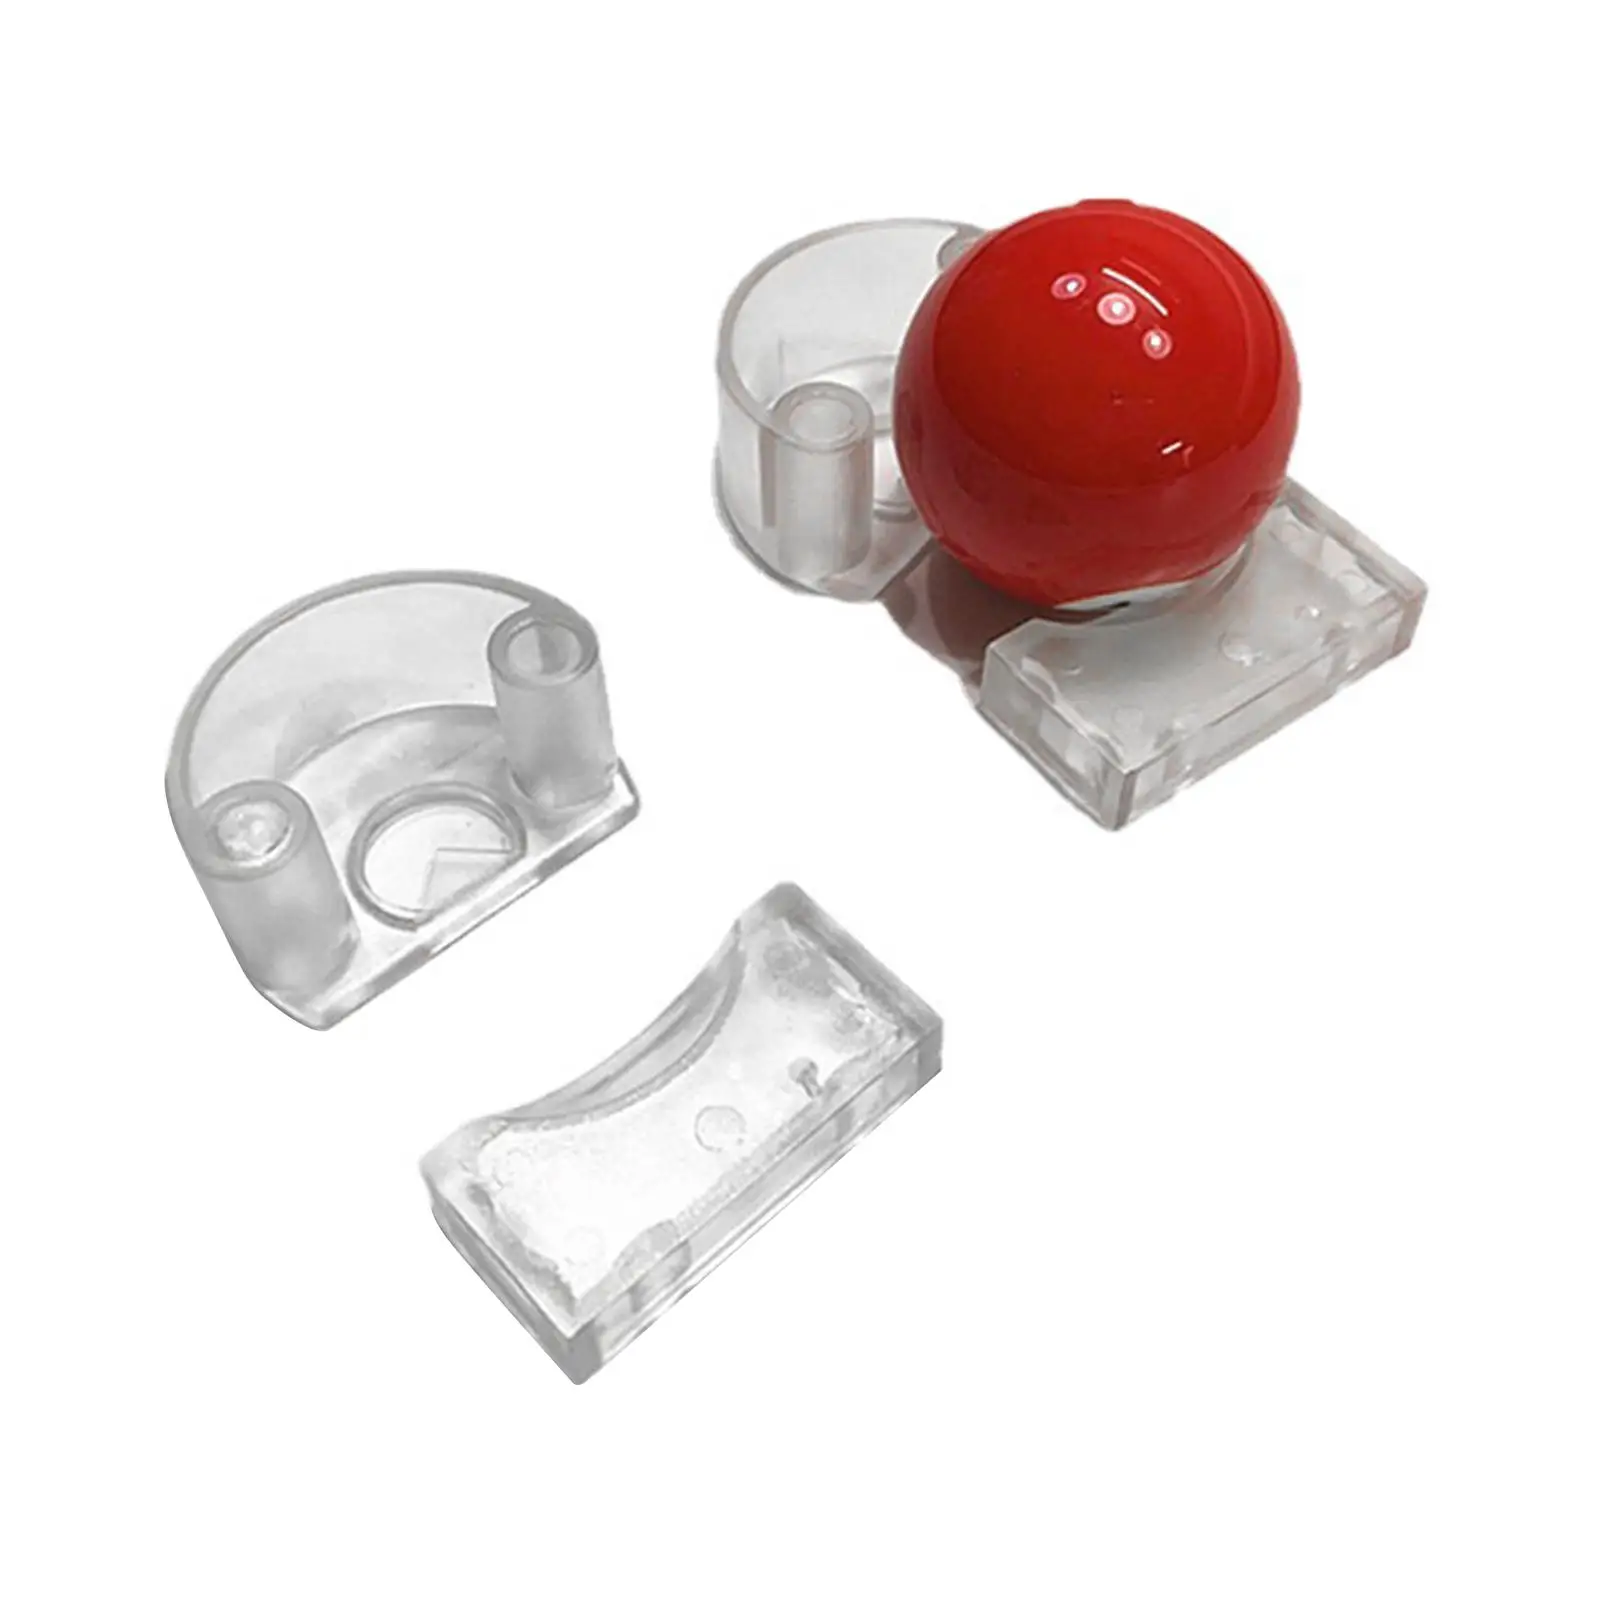 2Pcs Billiards Ball Position Marker Portable Transparent Snooker Ball Holder Pool Table Accessories